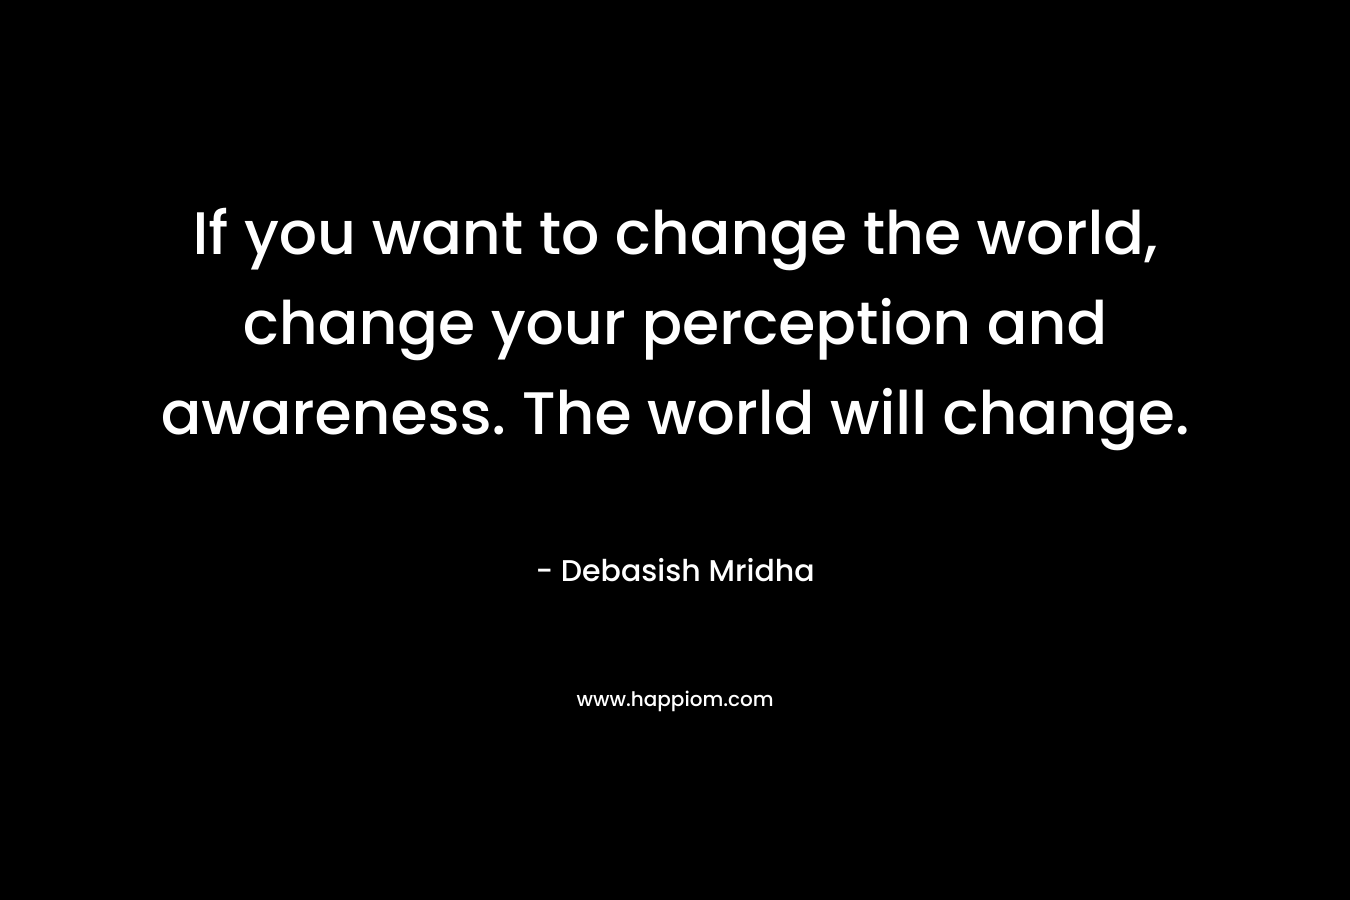 If you want to change the world, change your perception and awareness. The world will change.